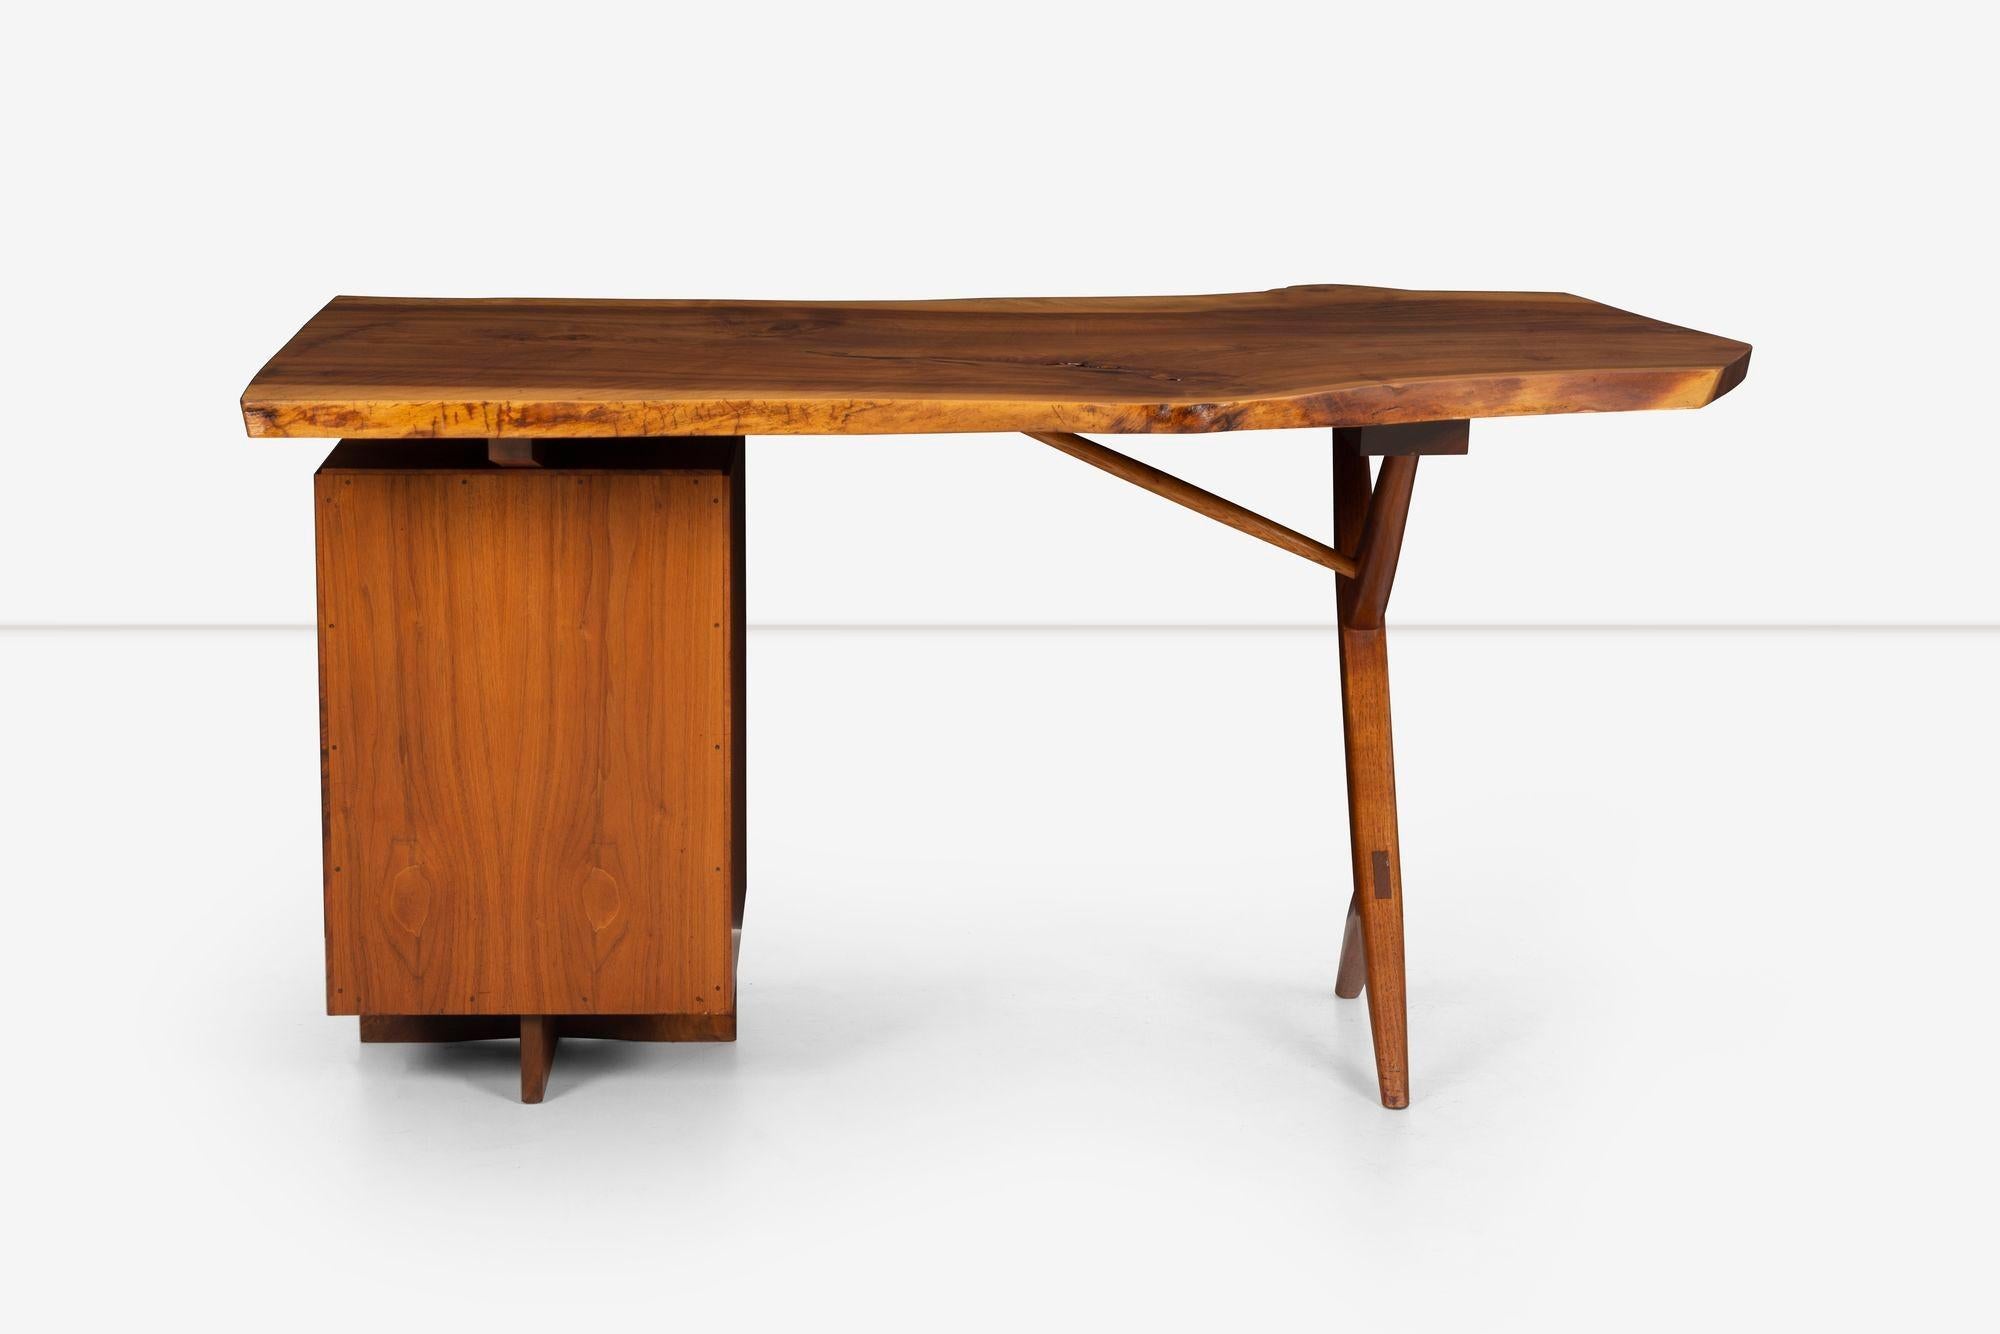 George Nakashima Special Conoid Desk with Two Free Edges Top in intense-grained English Walnut, Selected by George with walnut cross-leg support and a three-drawer pedestal storage base.
It comes with a copy of the drawing of the desk by George